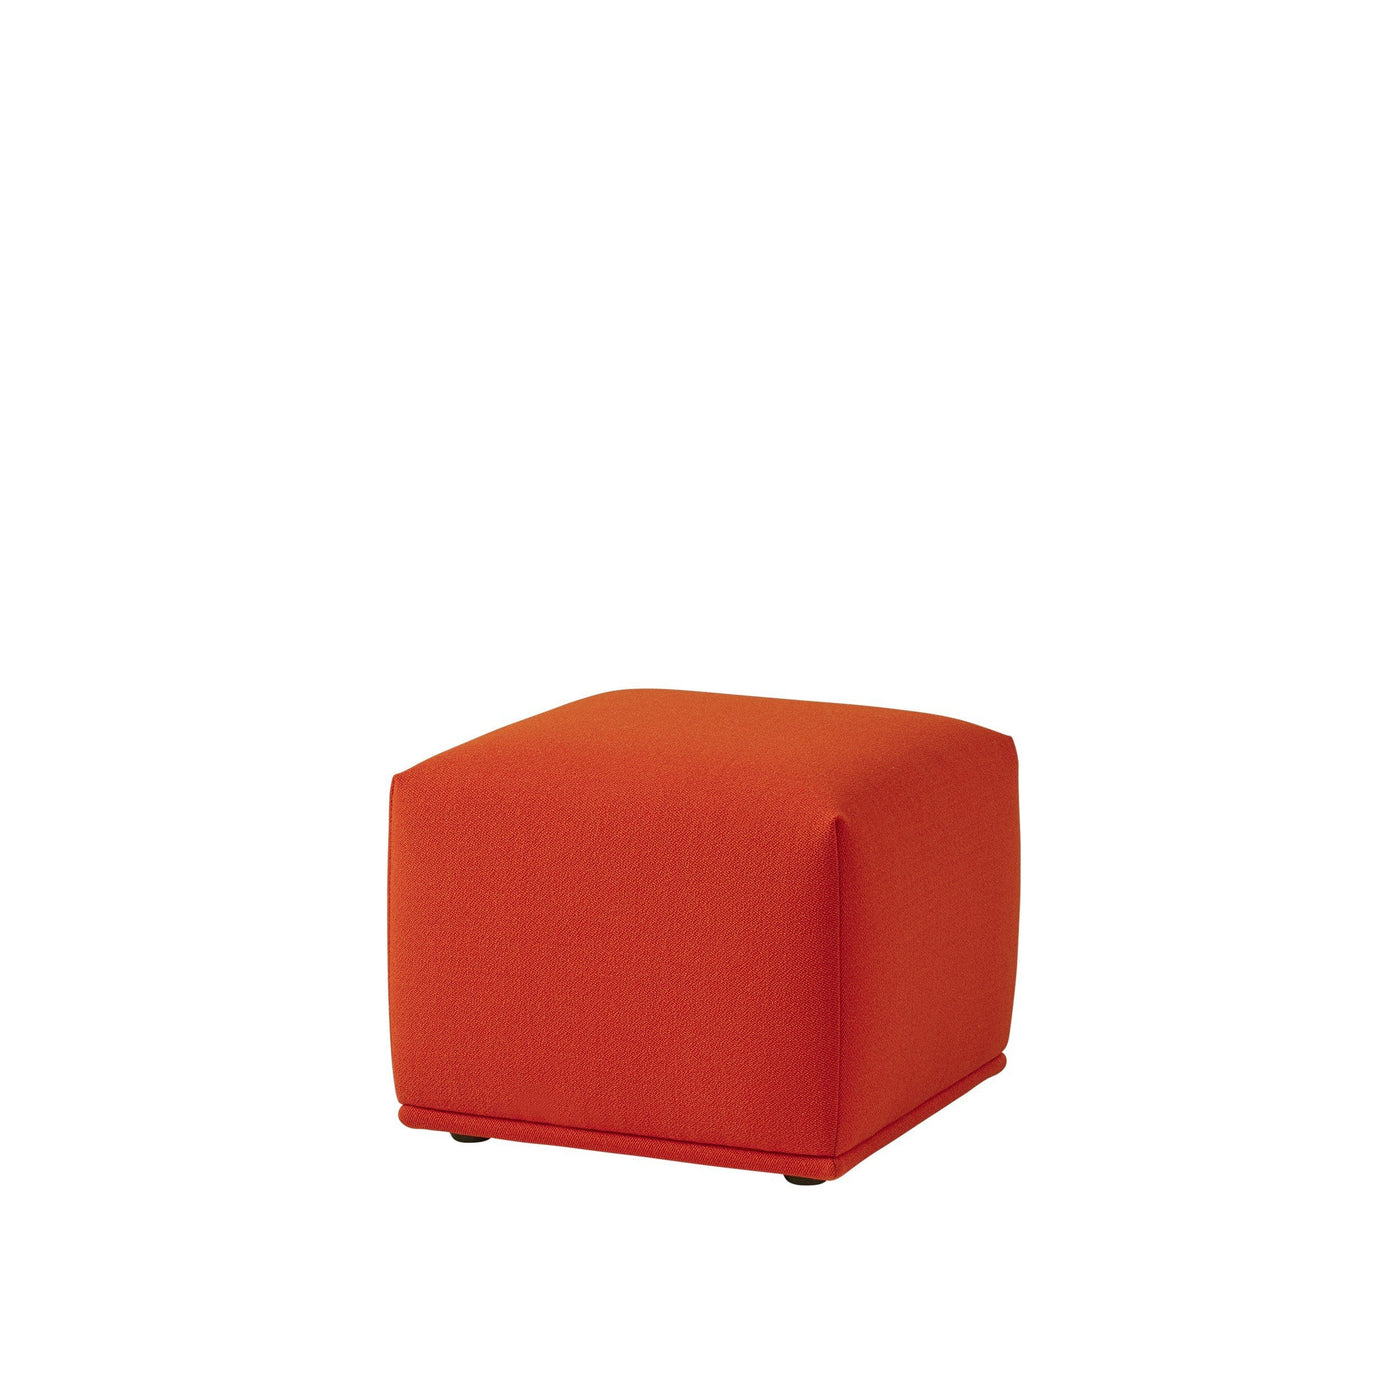 Vidar 542 by Kvadrat/Raf Simons. Red upholstery linen fabric made to order for Muuto Echo pouf. Order free fabric swatches at someday designs. 